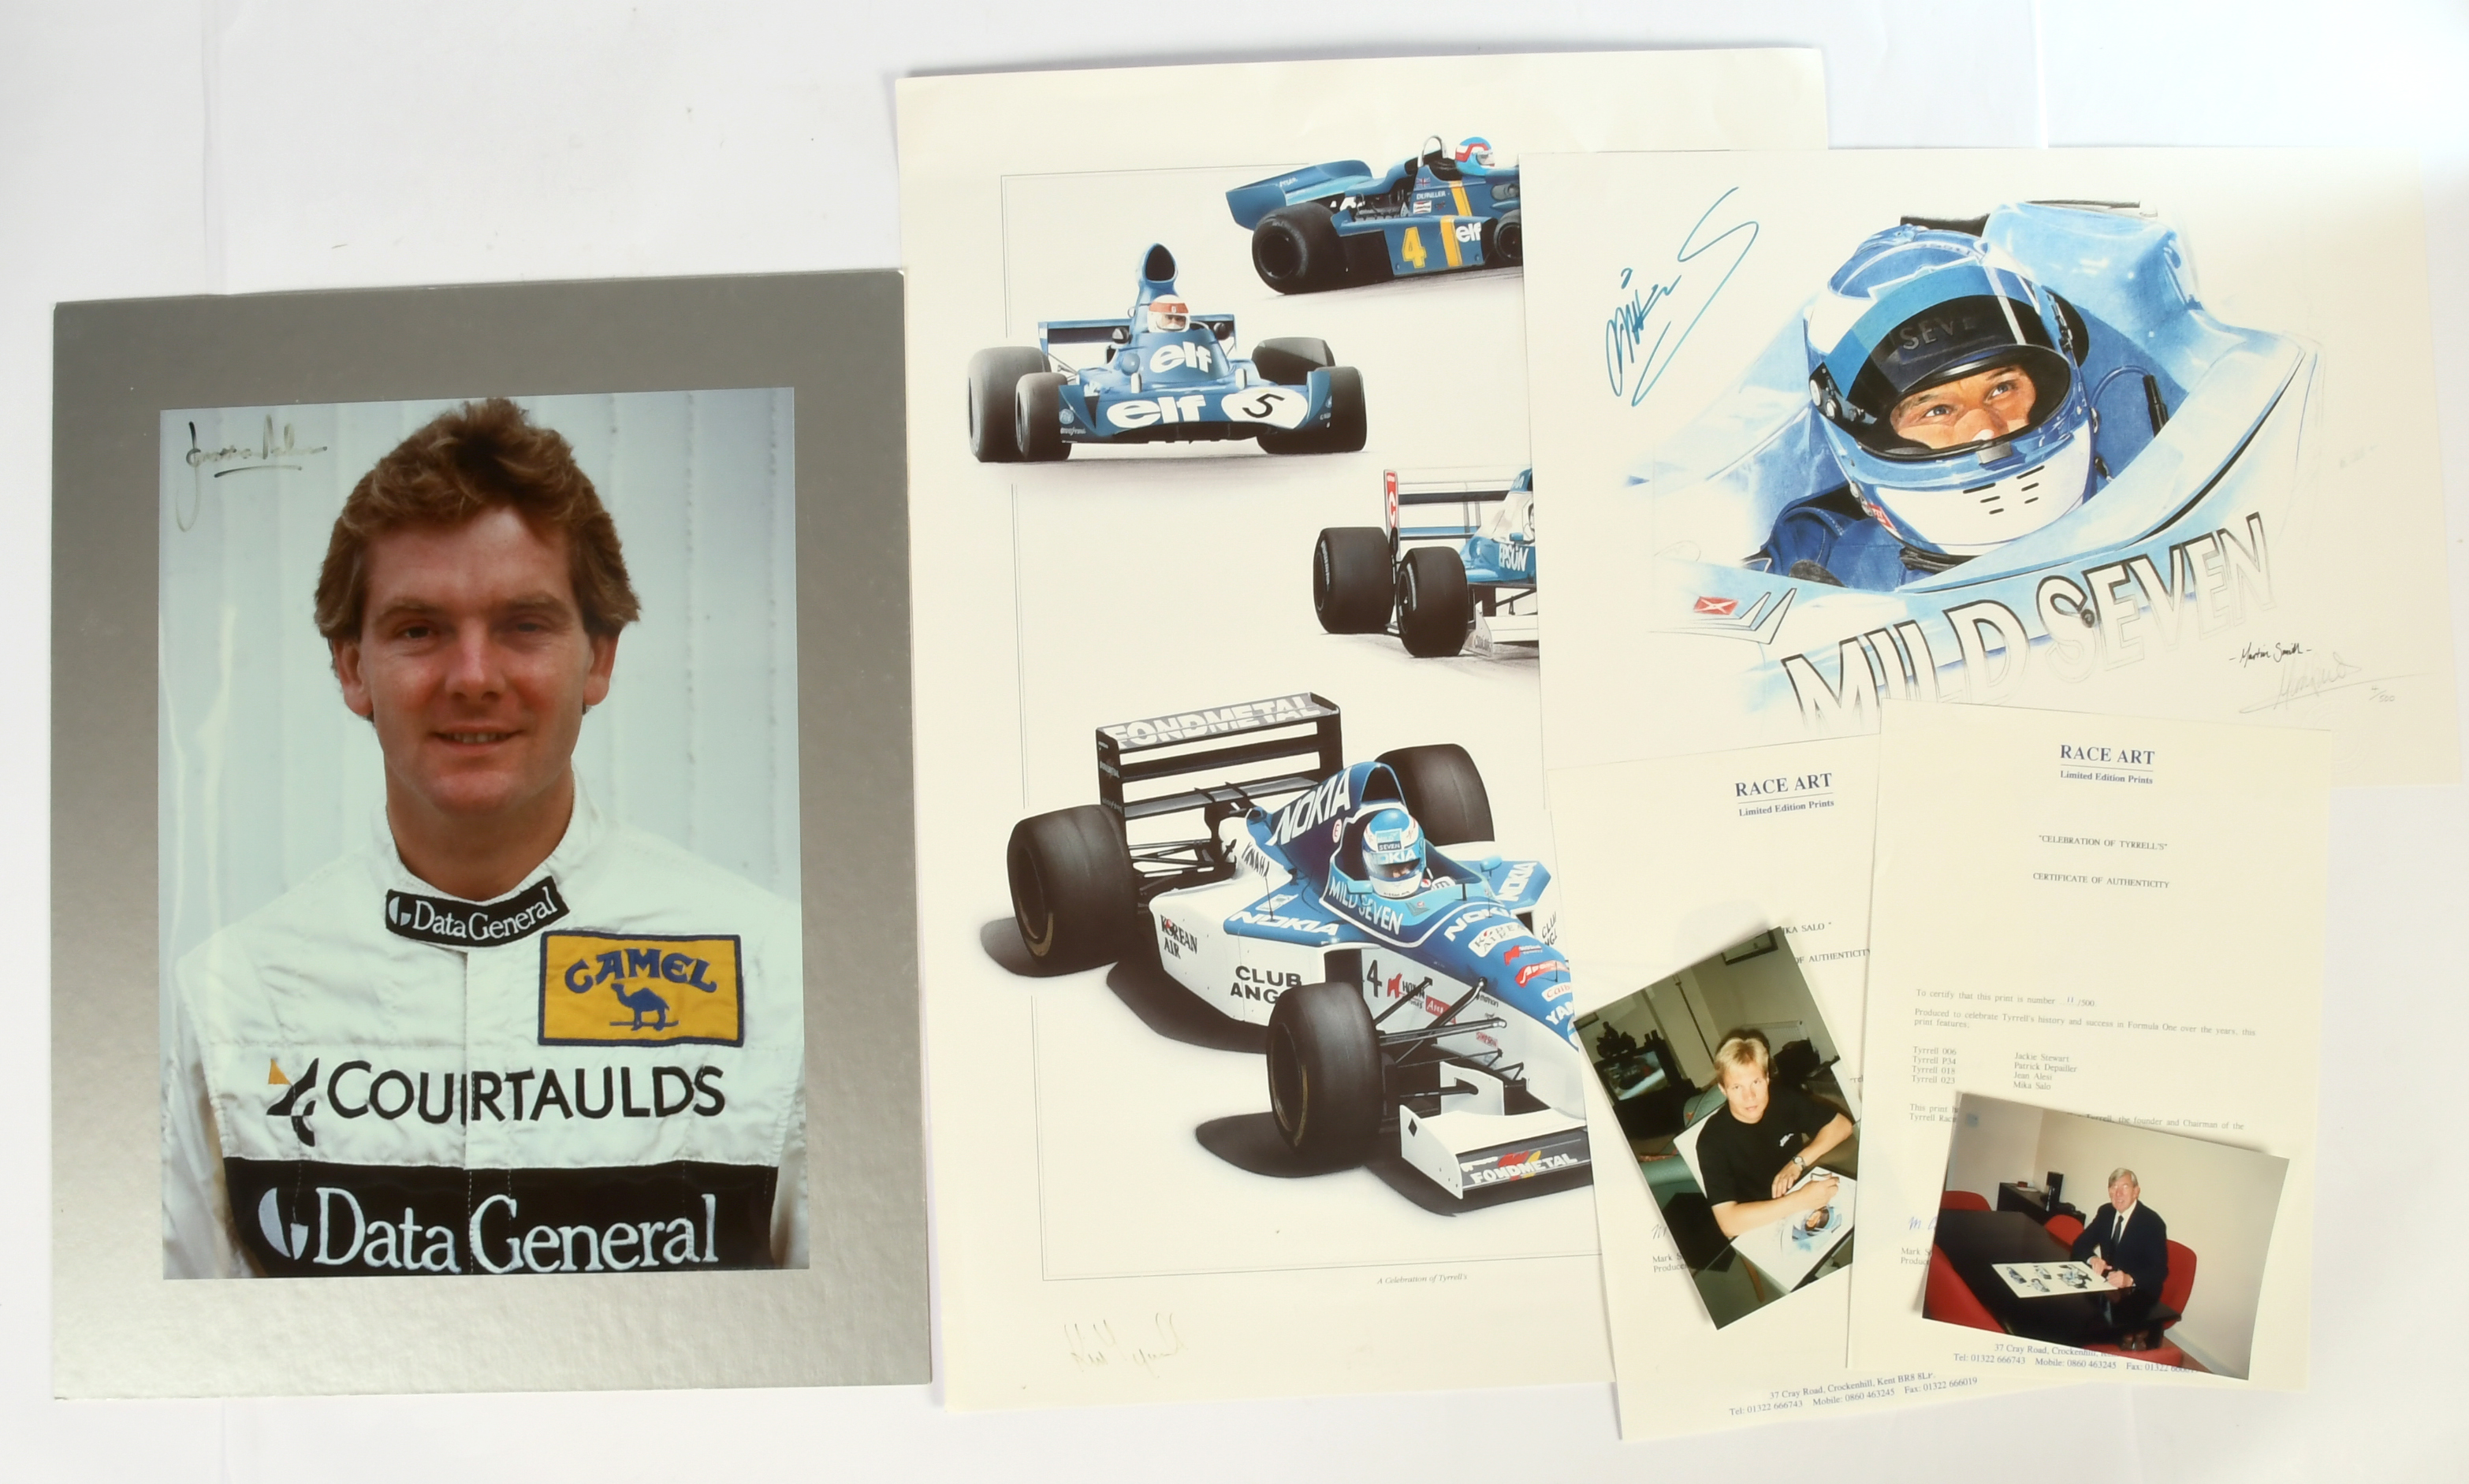 Pair of paints 1x signed by Ken Tyrrell, 1 x signed by Mika Salo